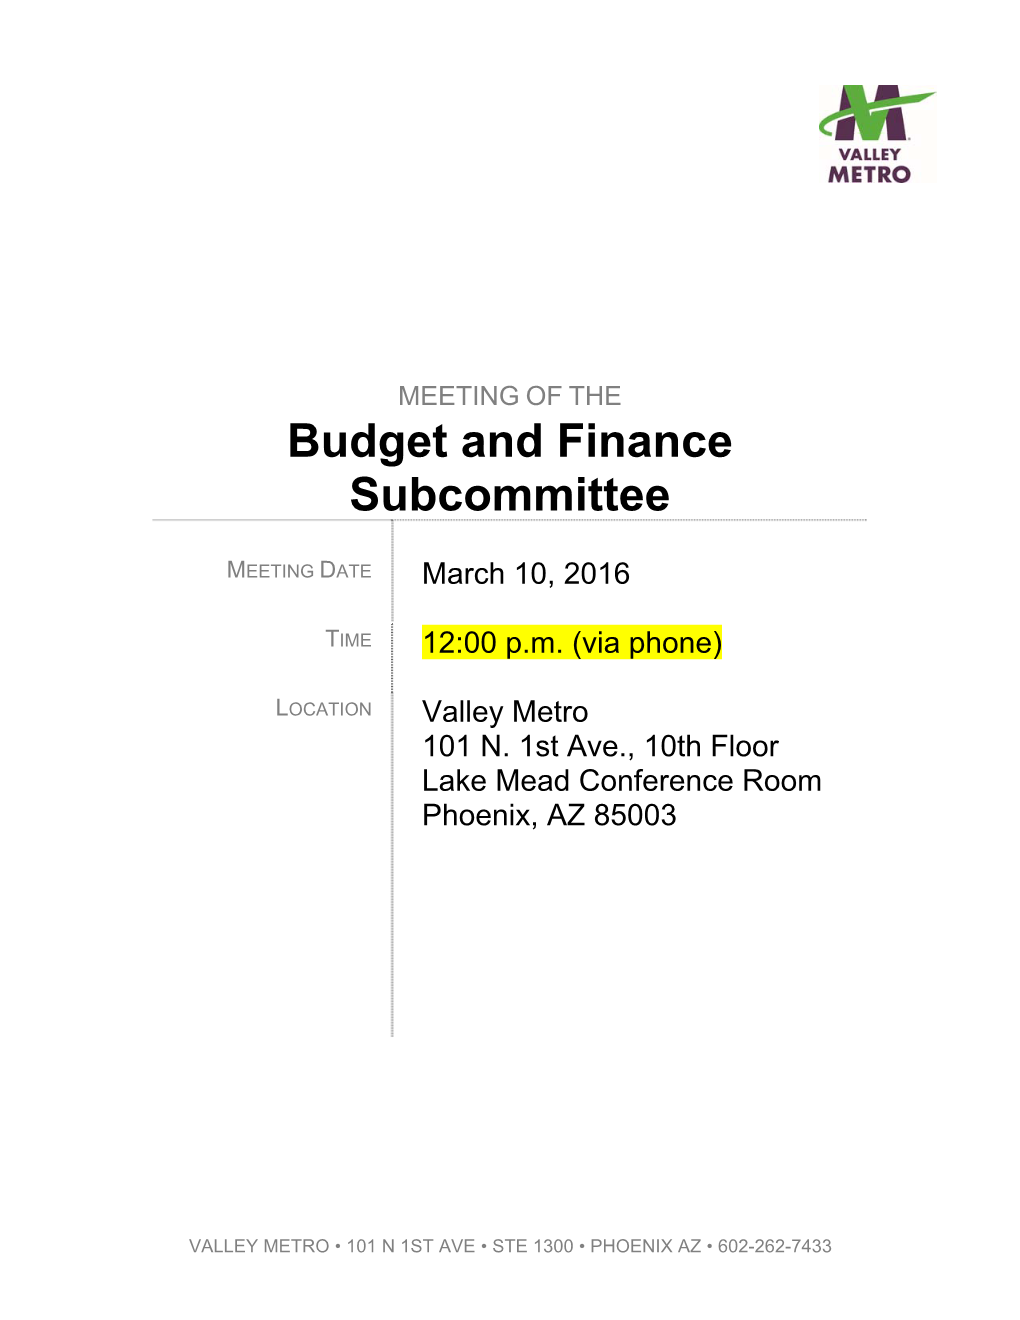 Budget and Finance Subcommittee